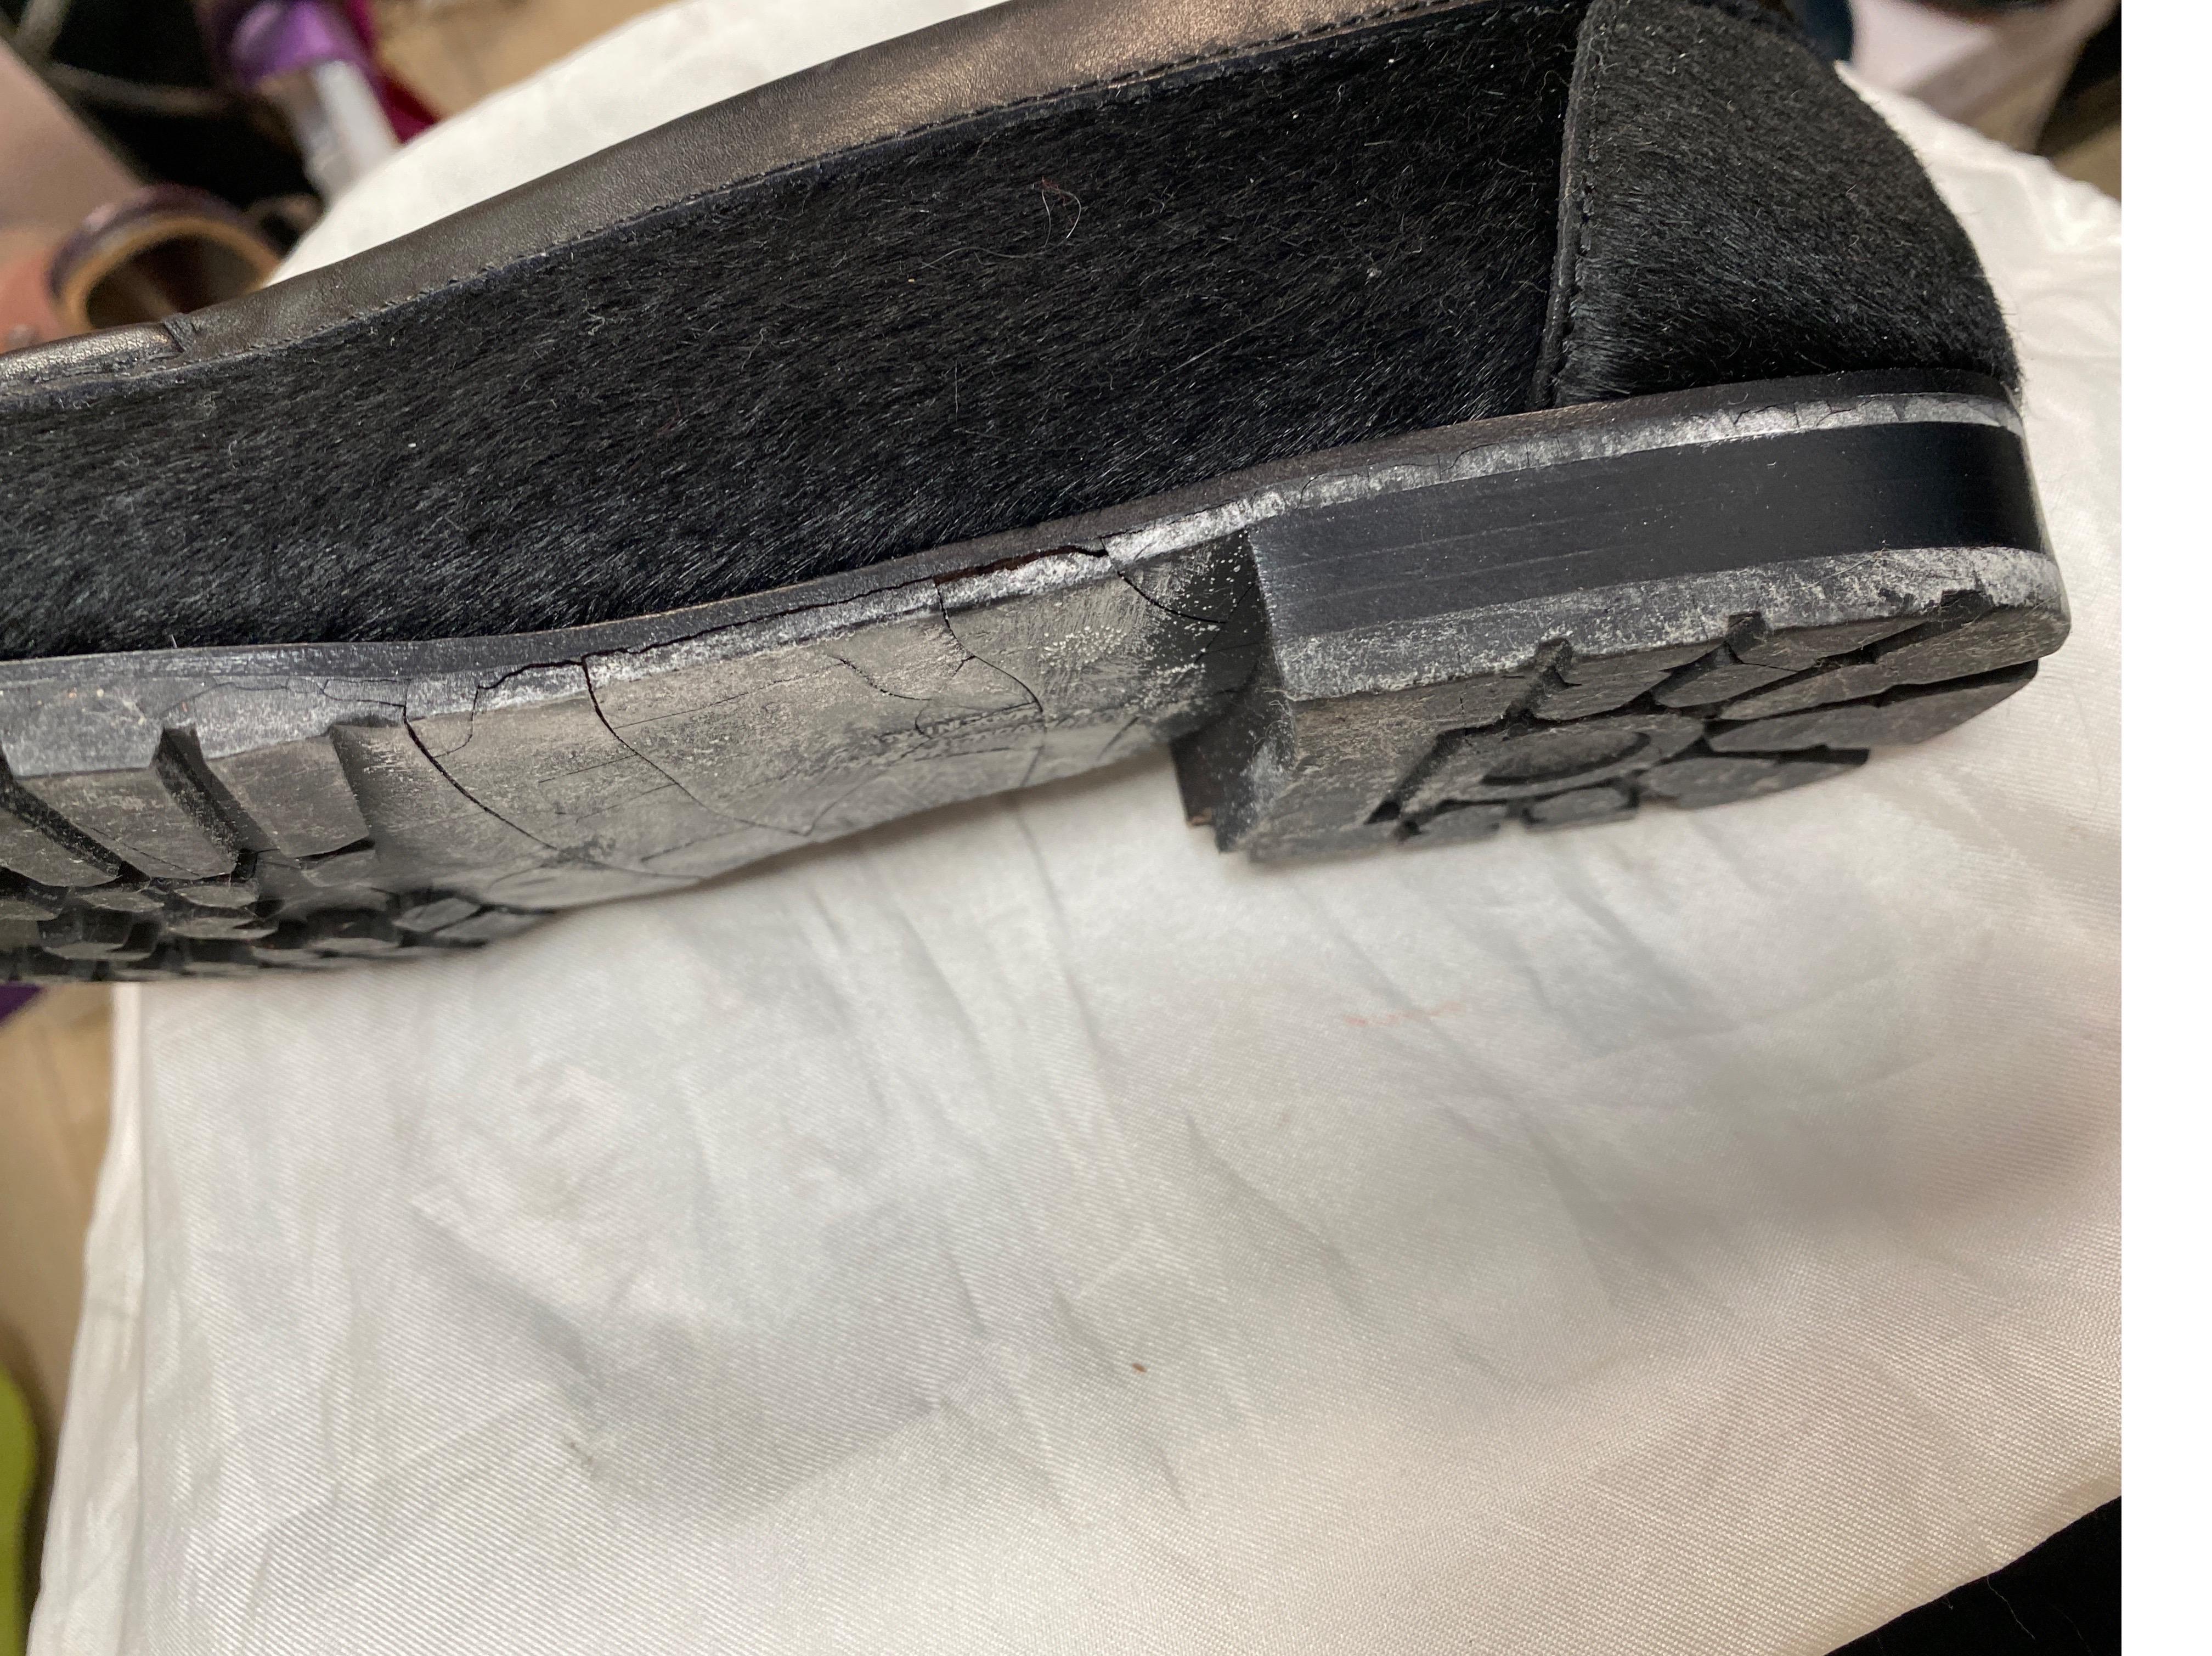 Salvatore Ferragamo Black Pony Hair Loafers w/ Silver Front Buckle - 7AA In Excellent Condition For Sale In West Palm Beach, FL